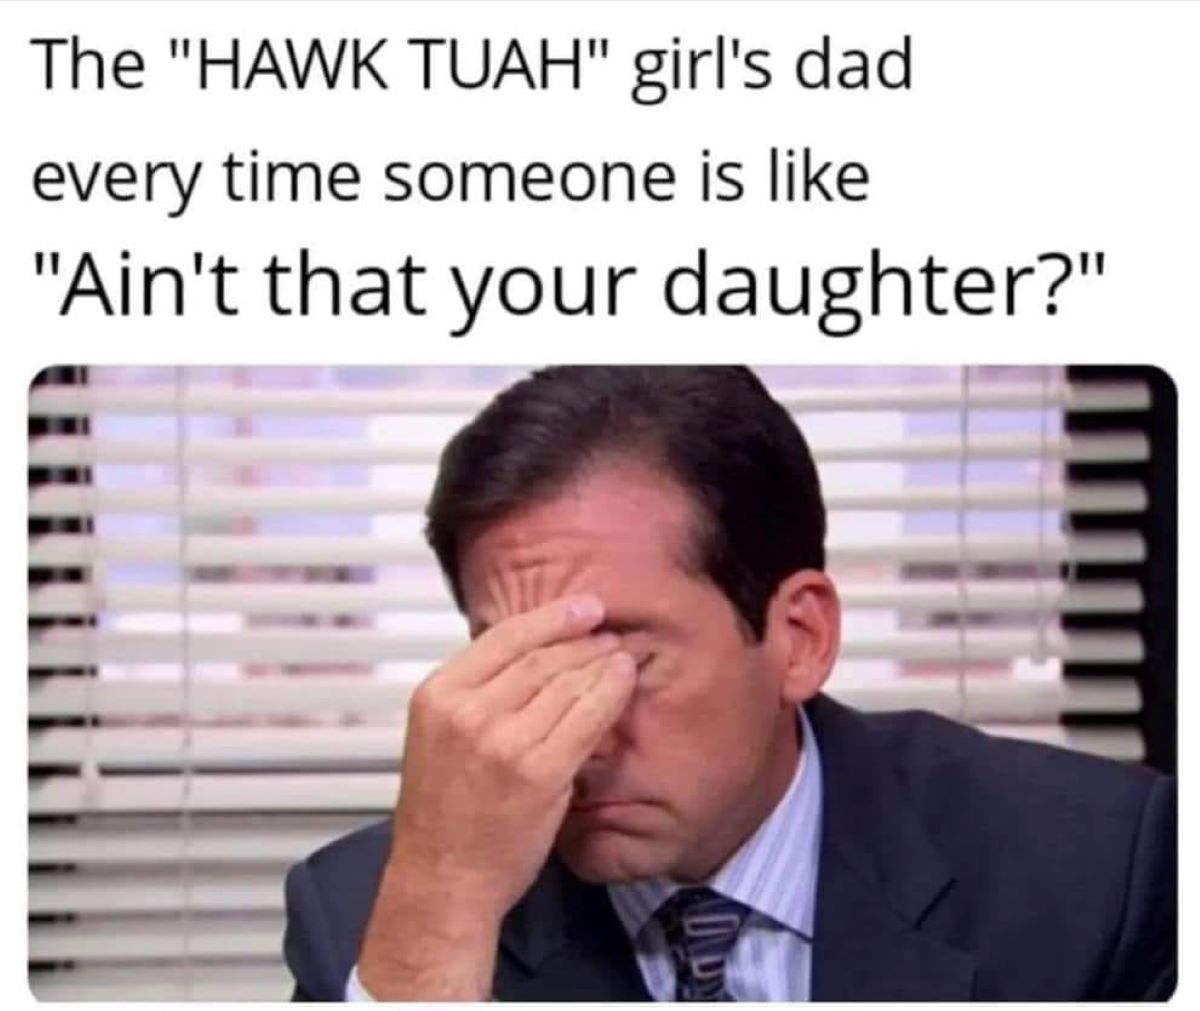 you ask a question and it turns into a meeting - The "Hawk Tuah" girl's dad every time someone is "Ain't that your daughter?"